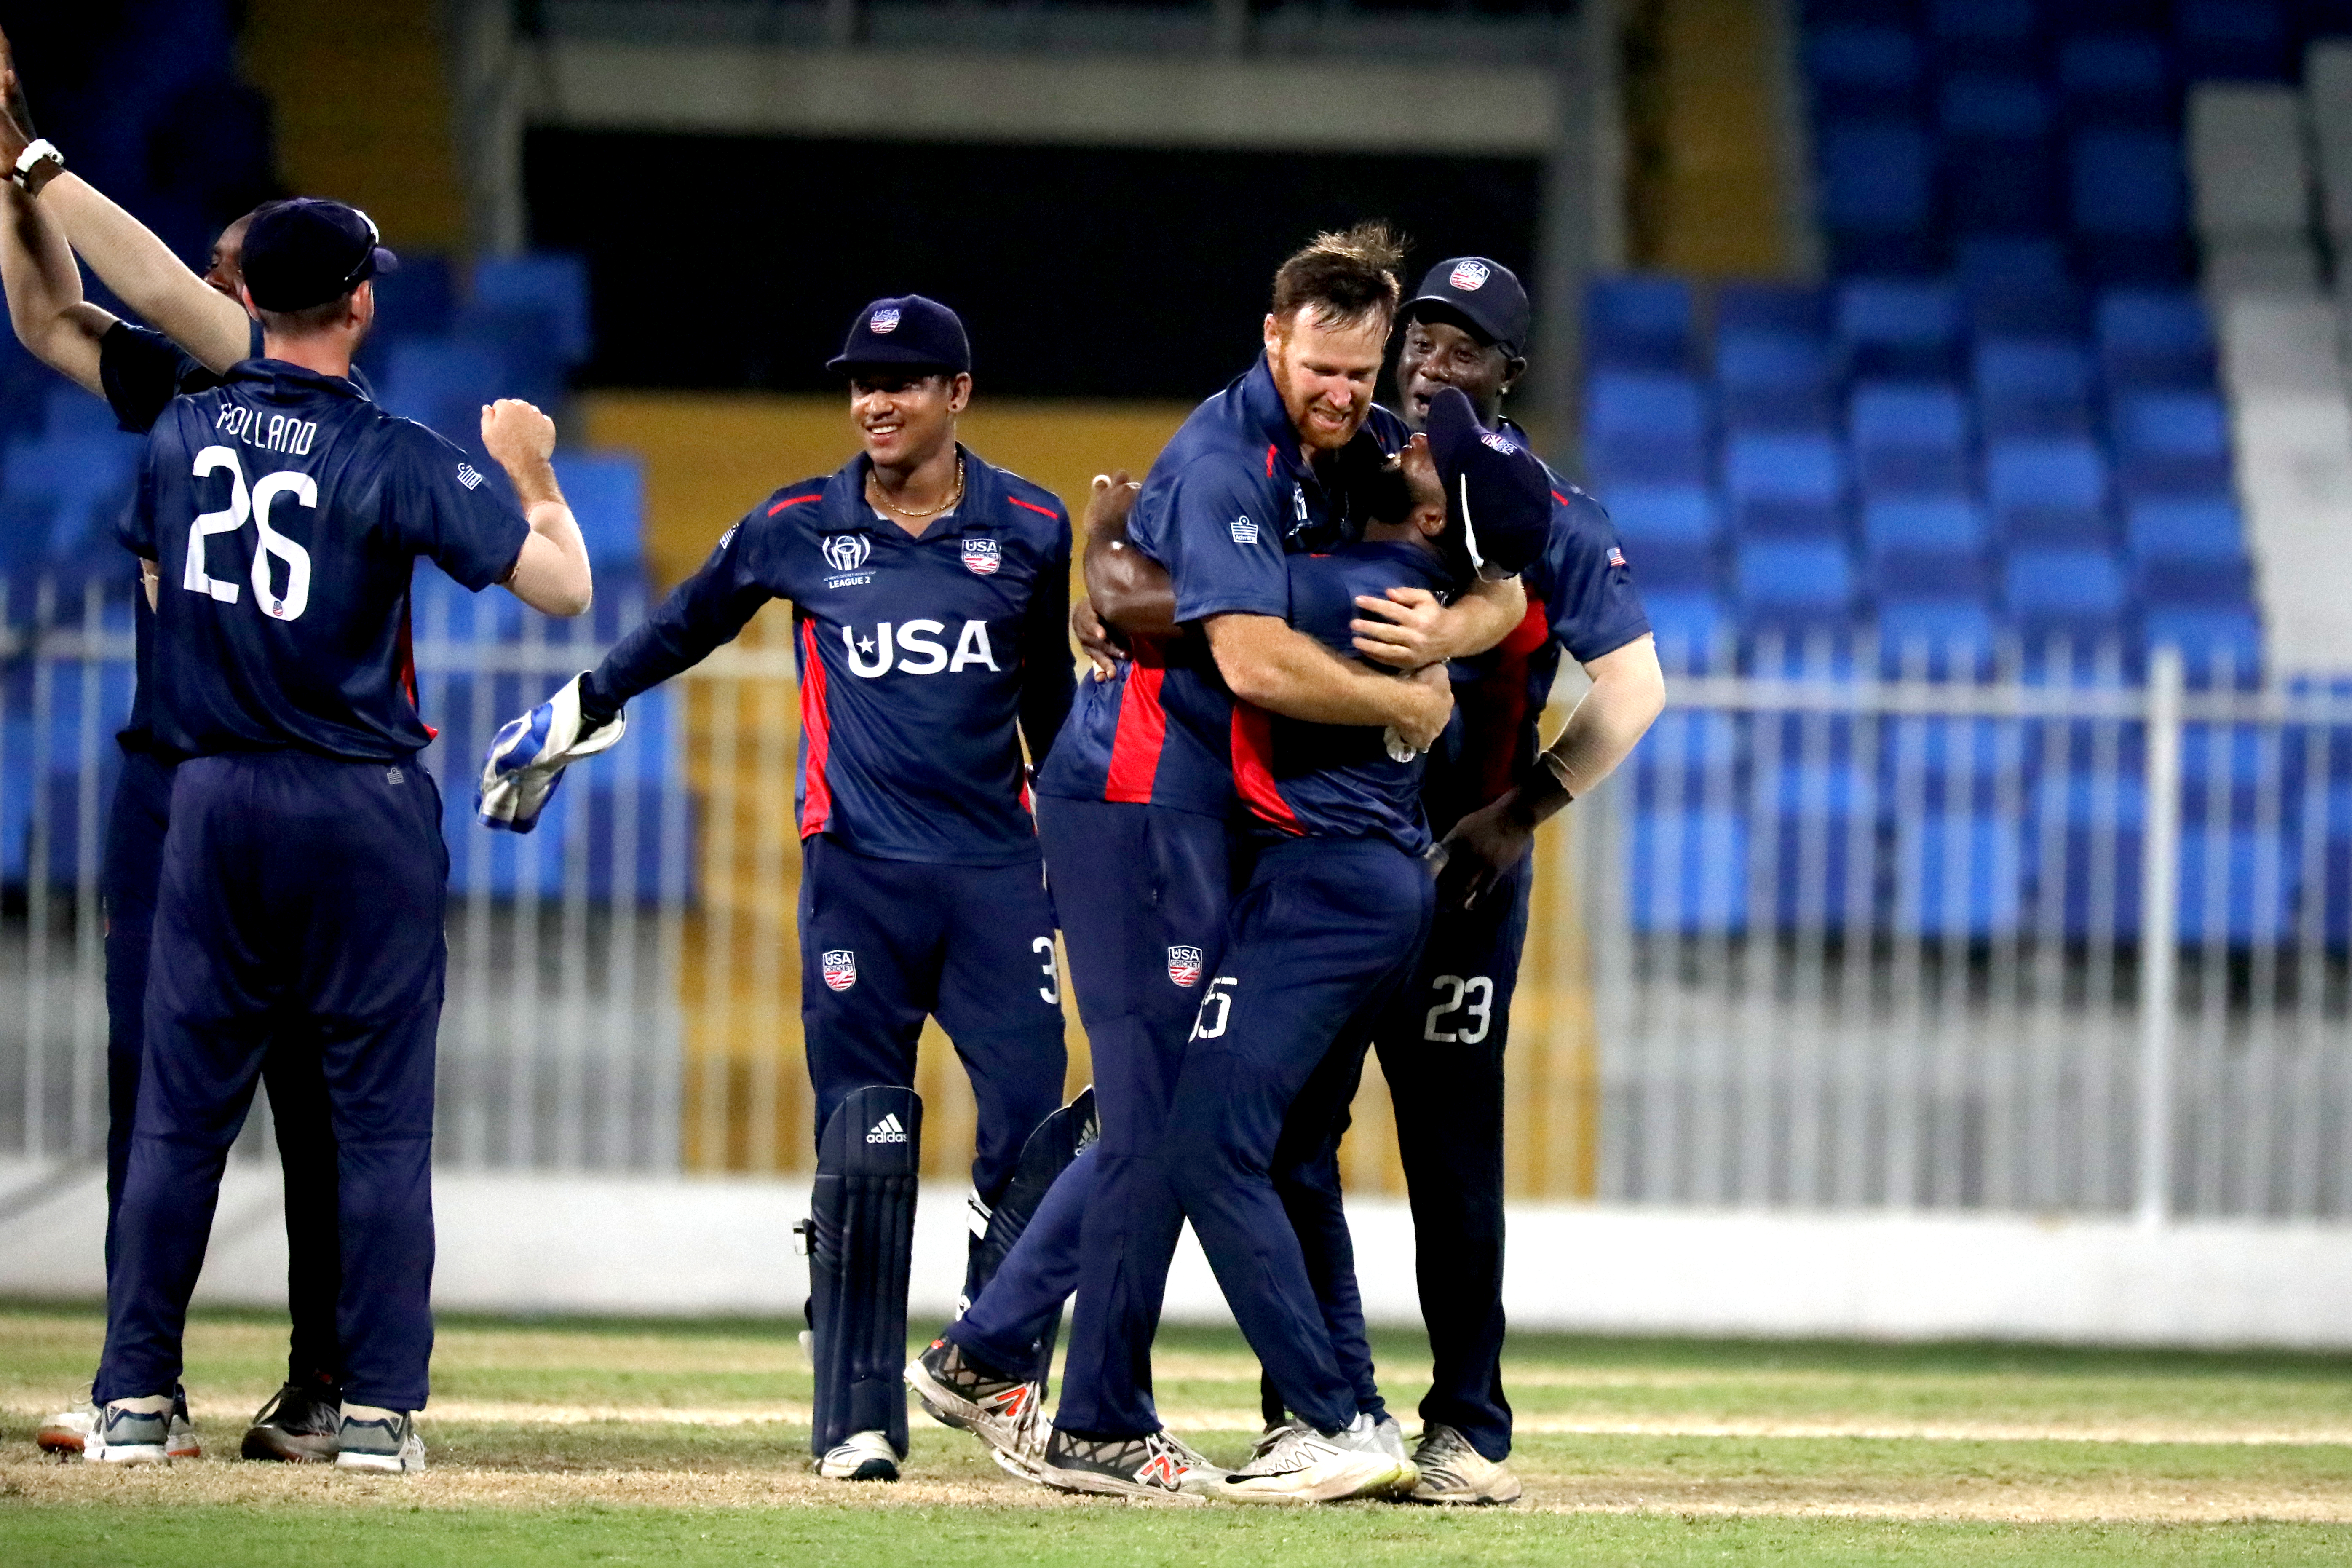 Super 50 proves perfect preparation for strong UAE ODI series; a new team assembling within USA Cricket; and plans for an important year ahead in 2020